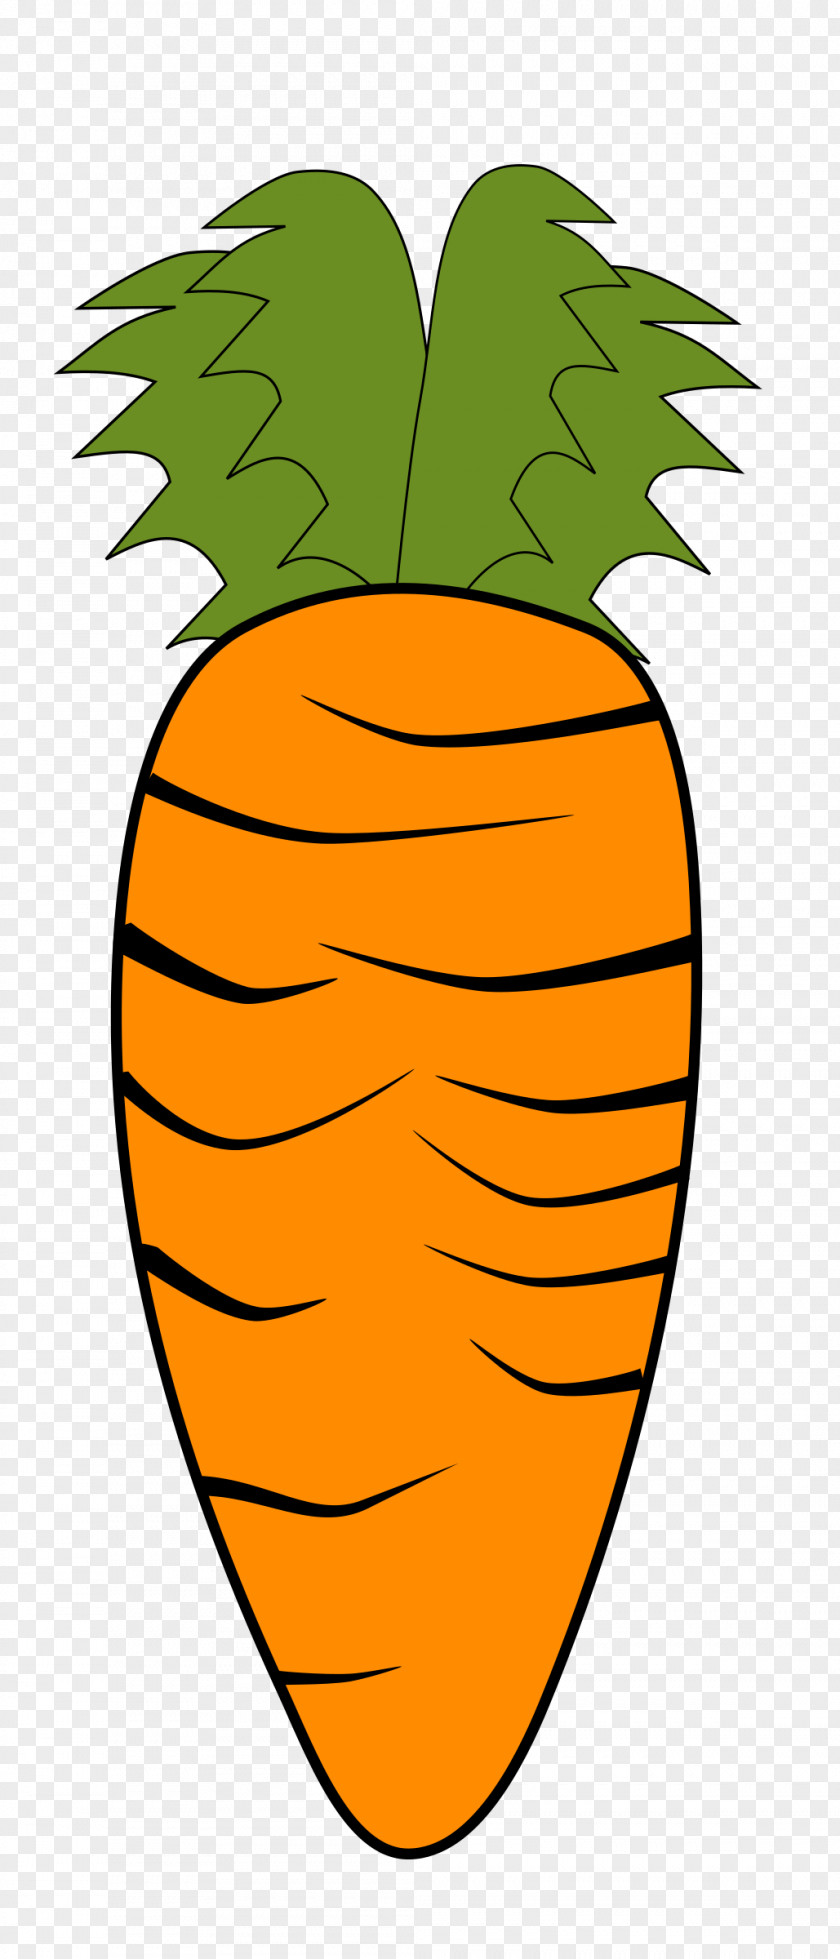 Carrot Vegetable PNG